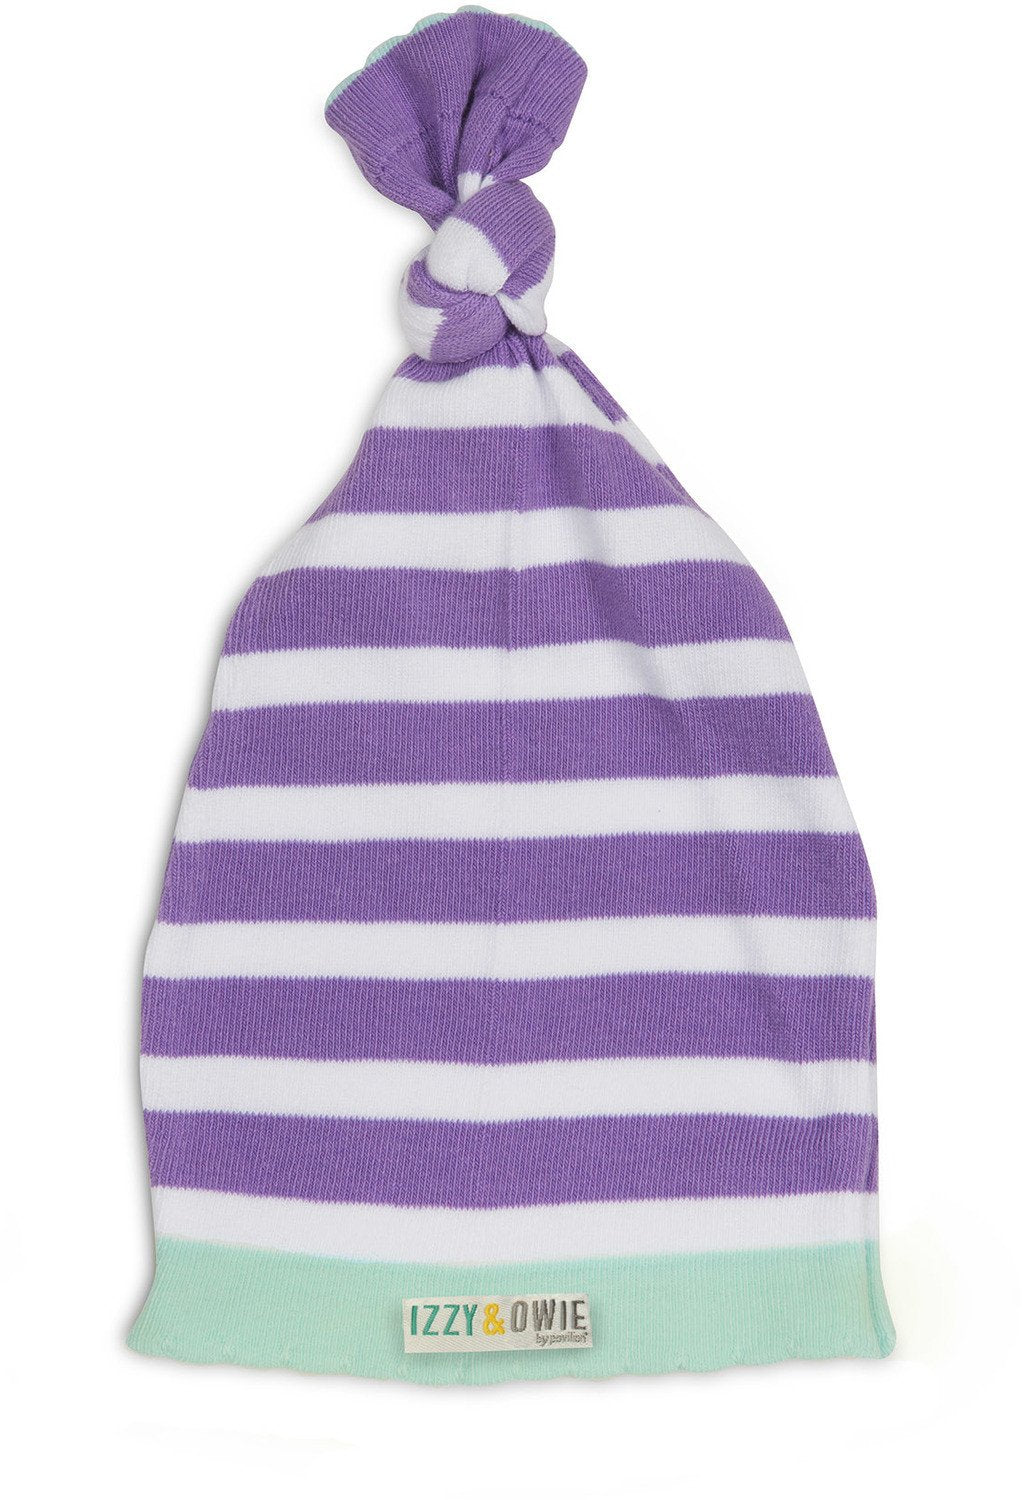 Blue and Lavender Stripe Knotted Baby Hat Baby Hat Izzy & Owie - GigglesGear.com